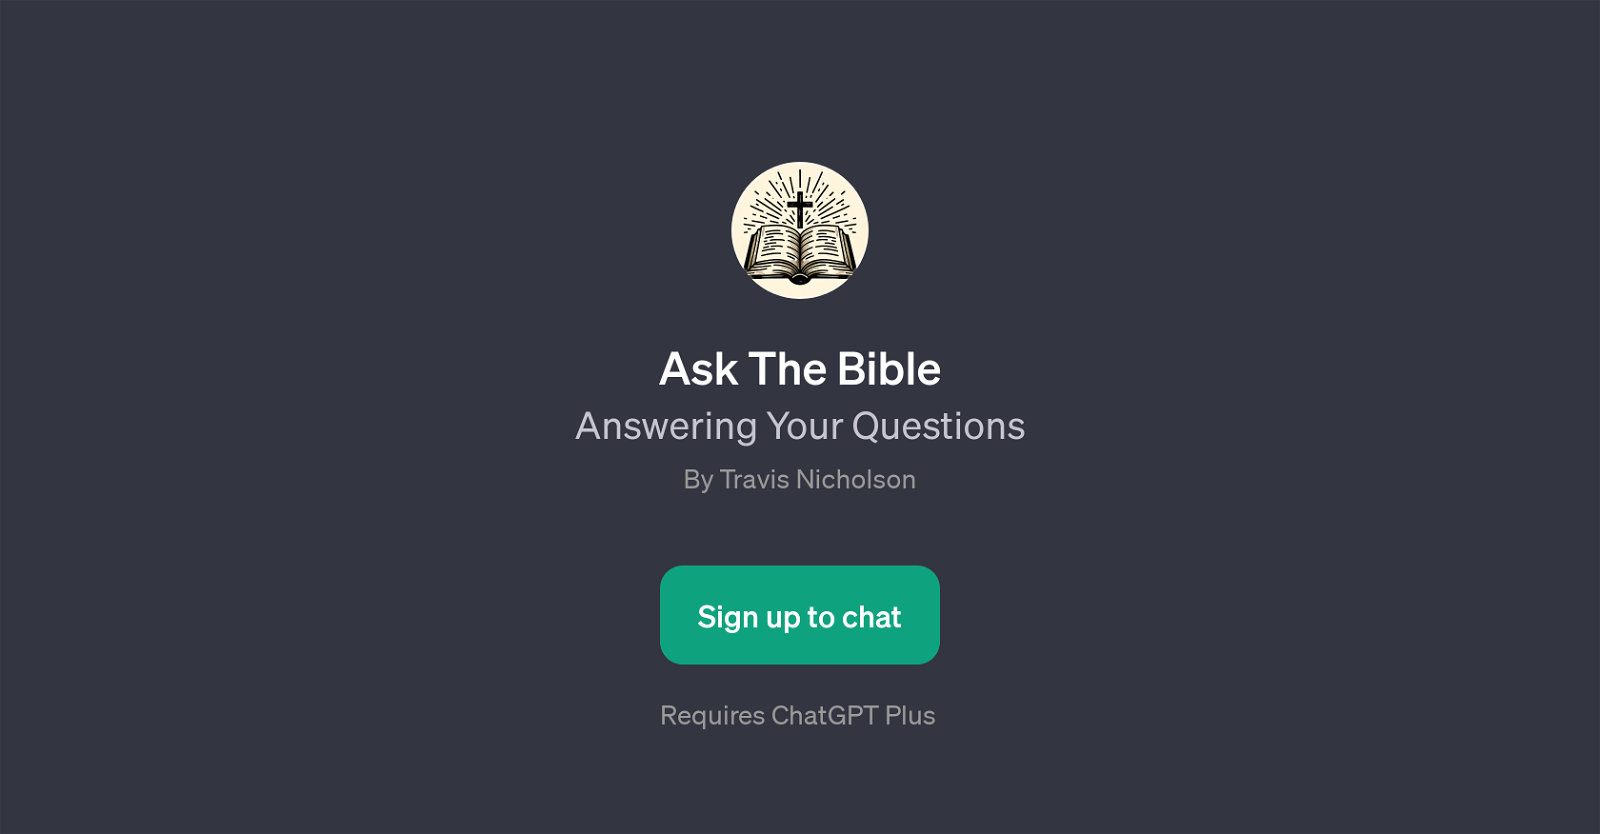 Ask The Bible website